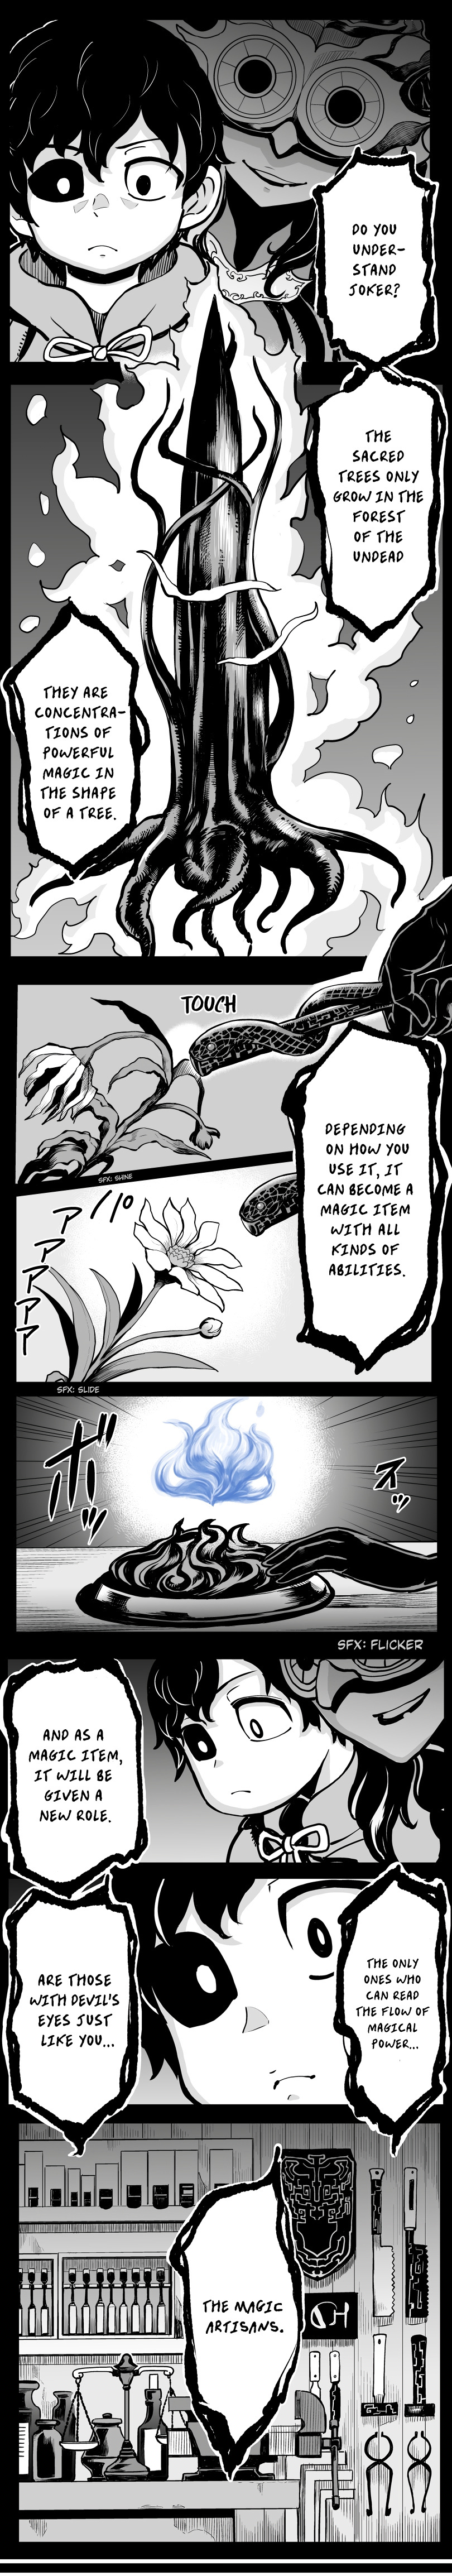 Cleo And The Forest Of The Undead - Page 2